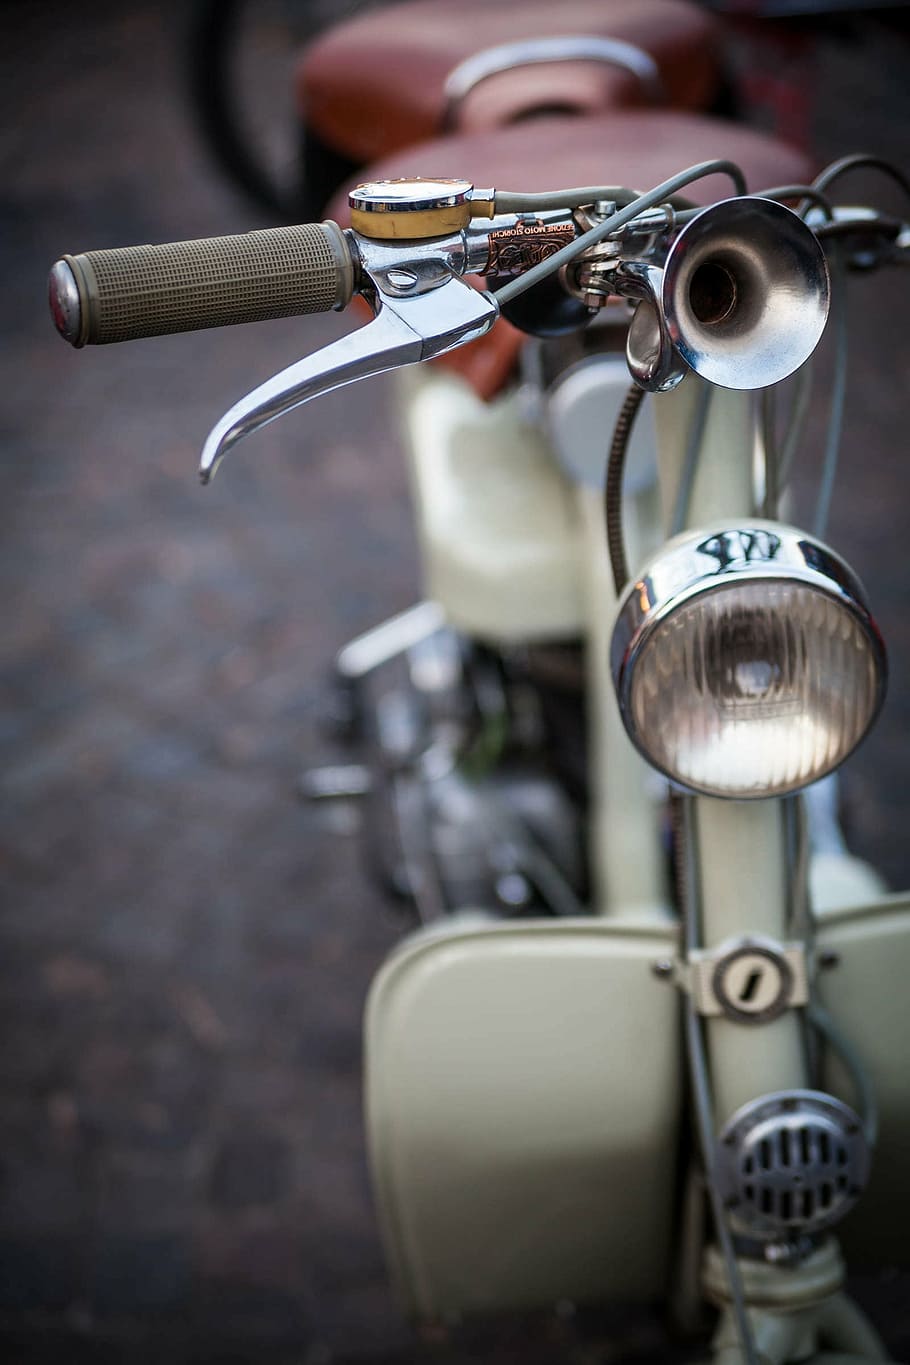 wasp, era, ancient, vintage motorcycles, motorcycles, moto, style, particular, transportation, bicycle